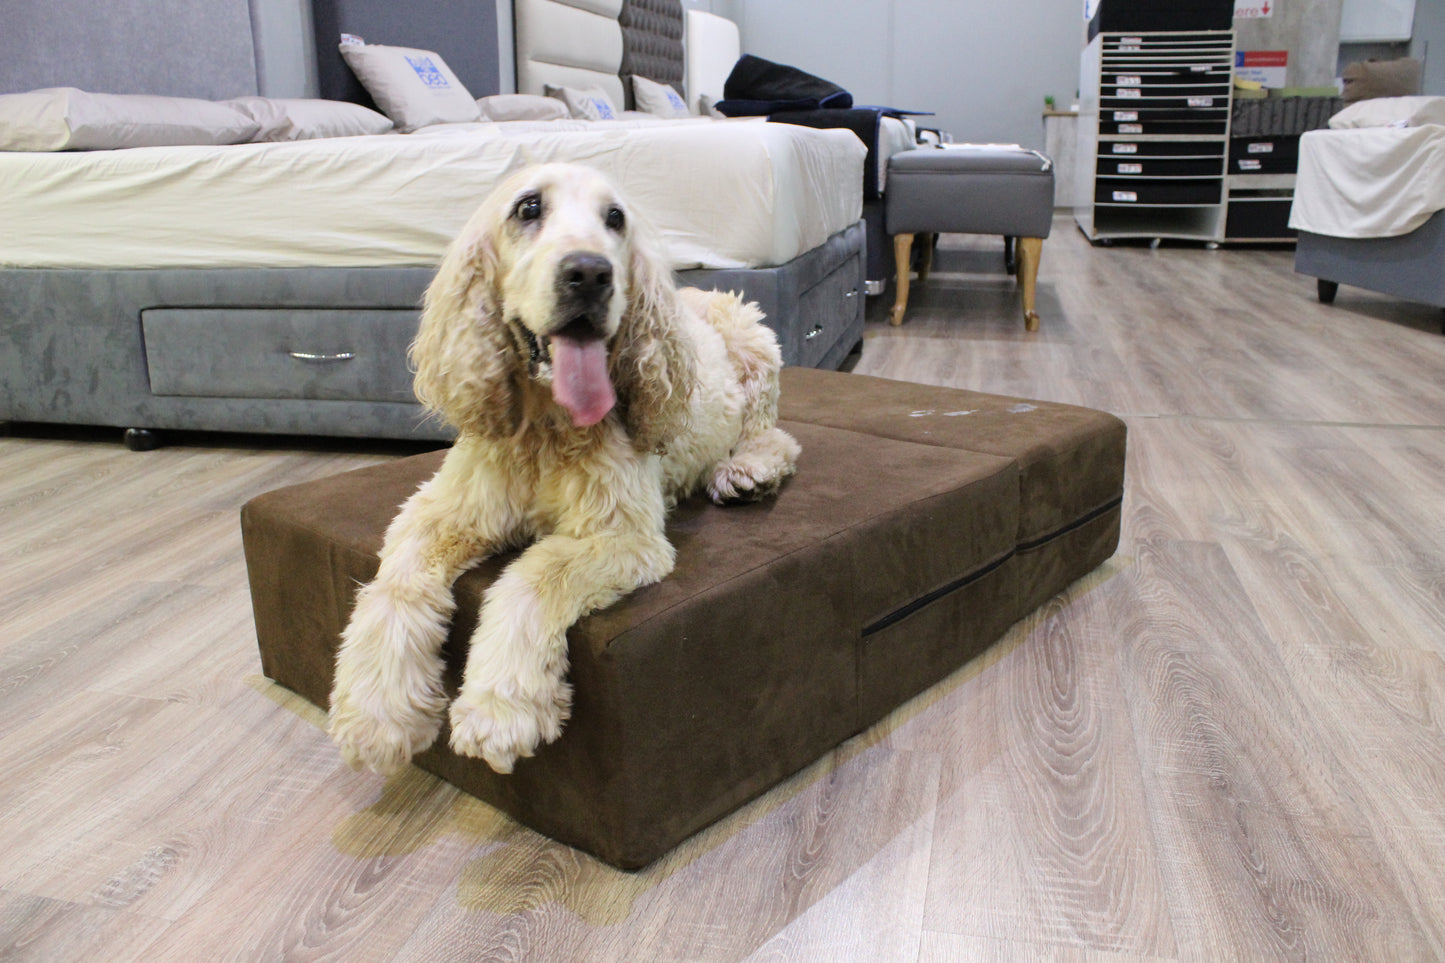 Dog-O-Pedic Sleeper Stairs (All -In-One Stairs & Mattress Combo)